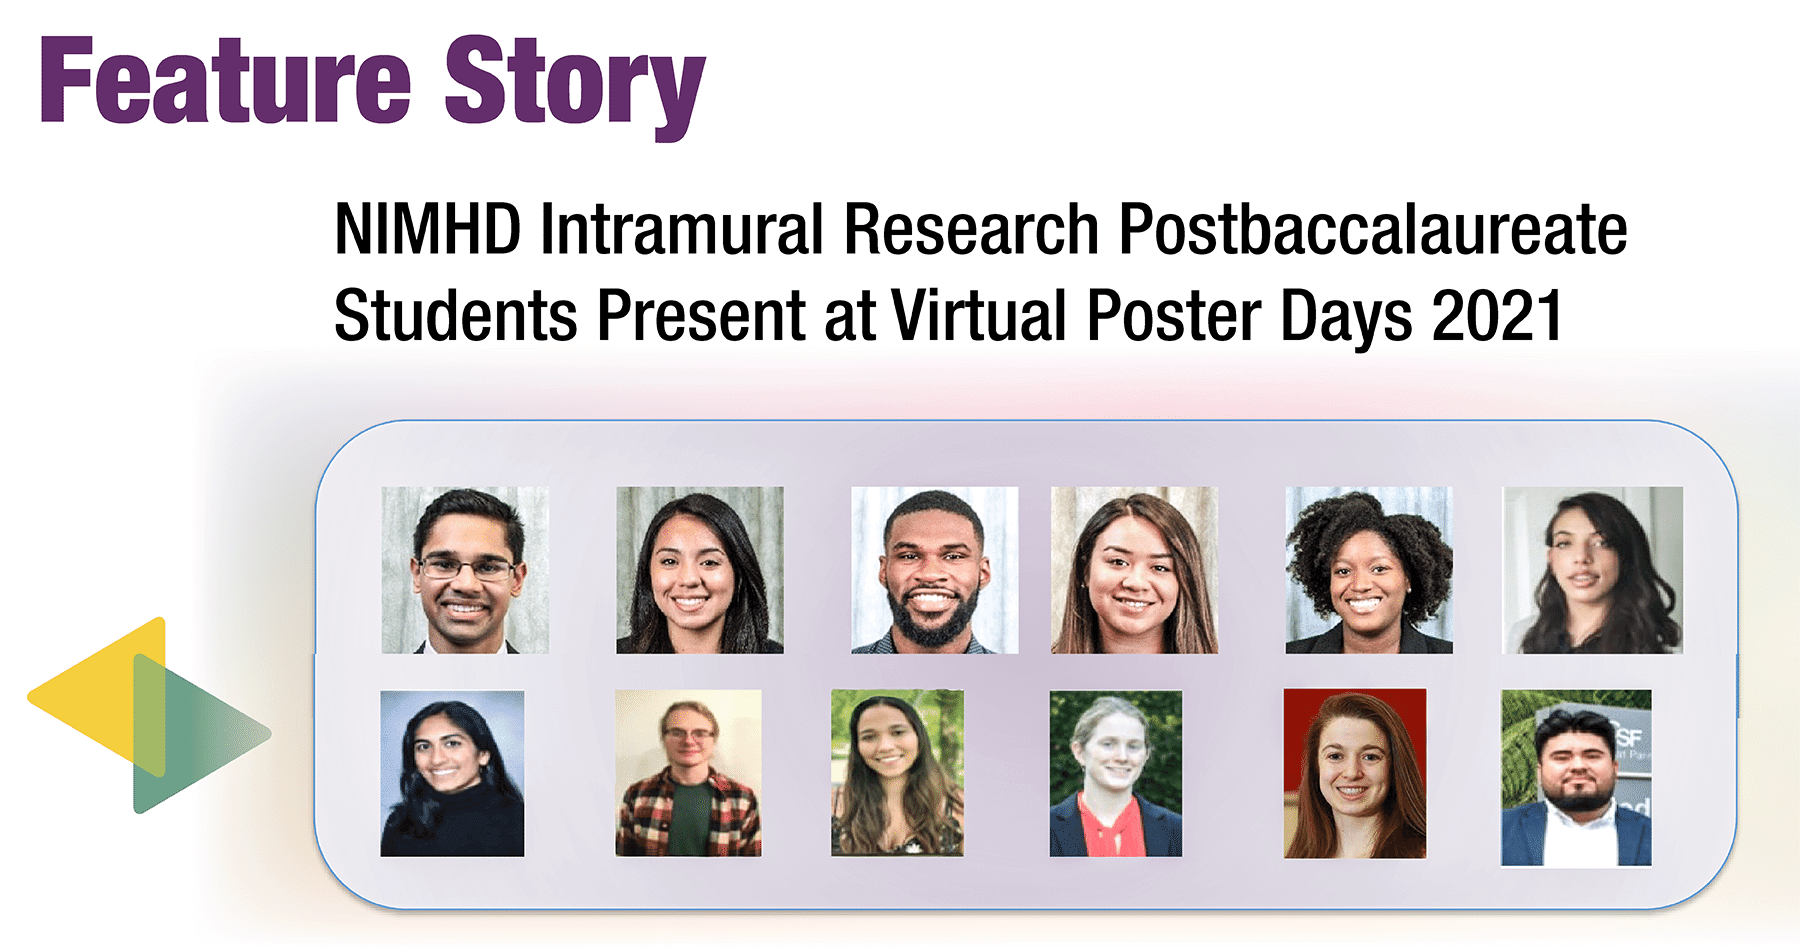 NIMHD Intramural Research Postbaccalaureate Students Present at Virtual Poster Days 2021